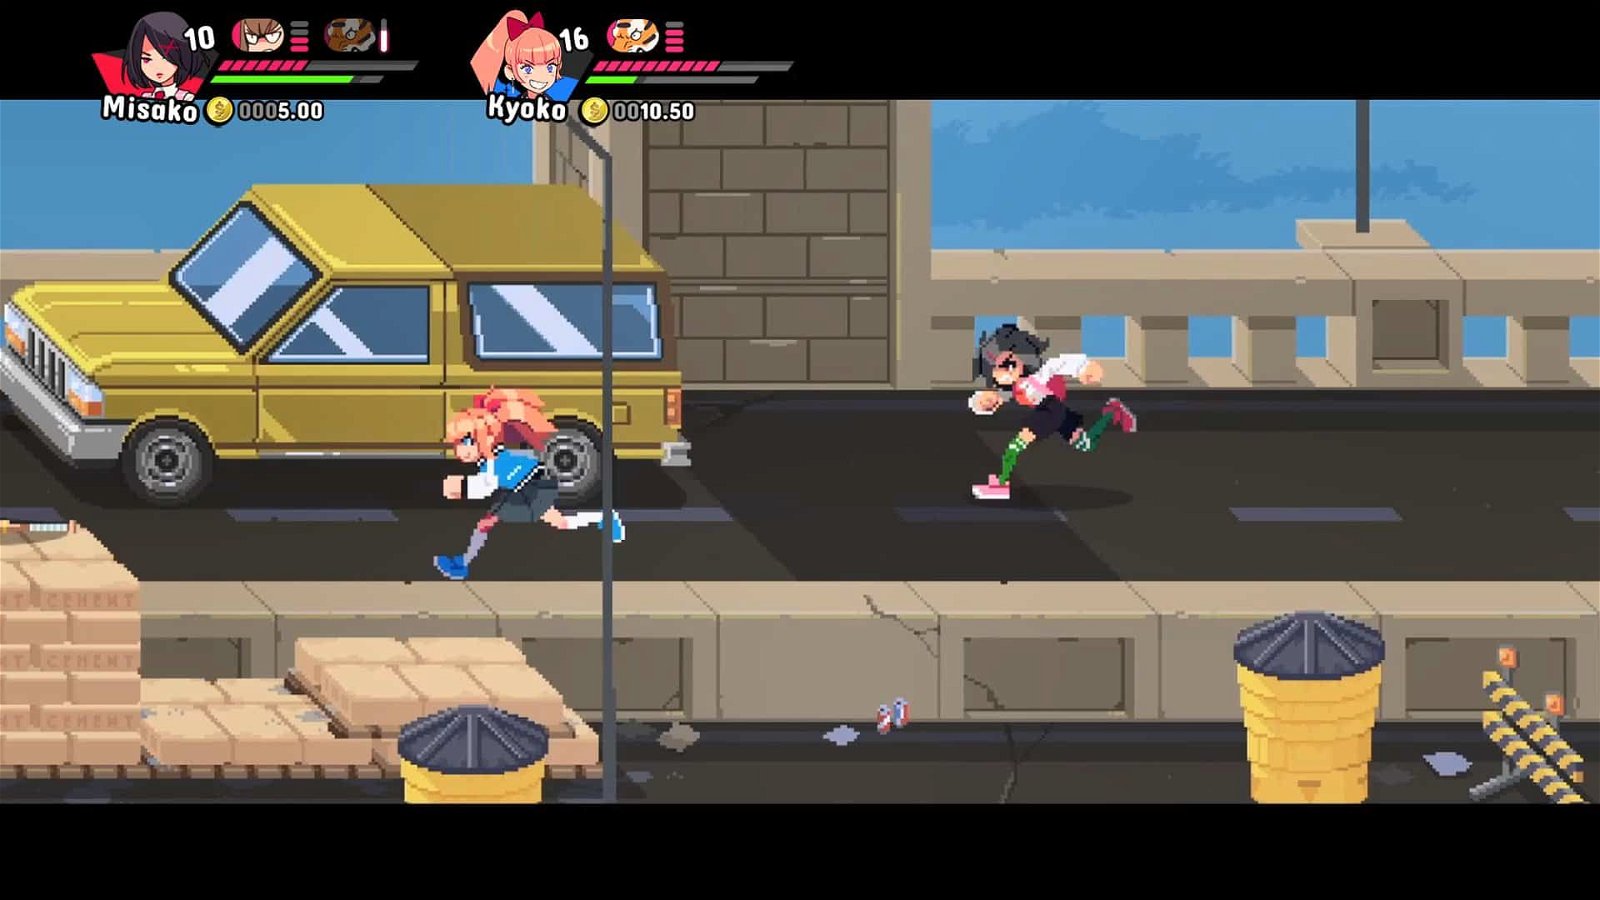 River City Girls 2, River City Girls II, River City Girls Two, Way Forward, Arc System Works, PS4, PS5, PlayStation 4, PlayStation 5, Nintendo Switch, Switch, release date, trailer, screenshots, pre-order now, Japan, Asia